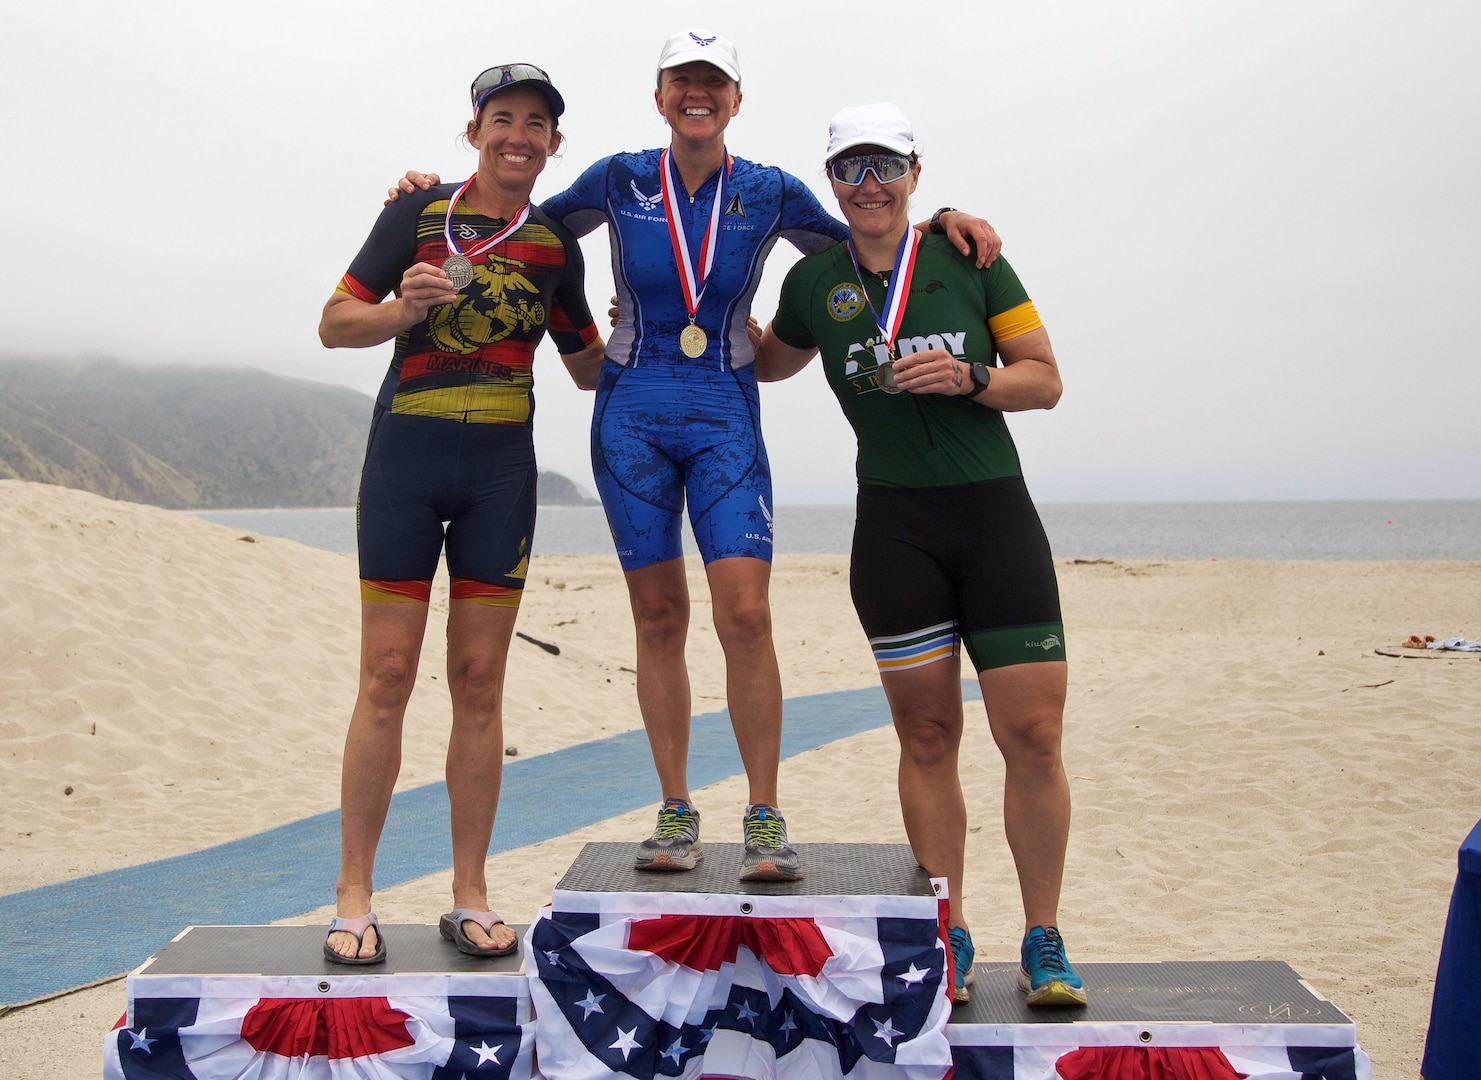 From left to right:  Marine Col. Christine Houser of MCB Camp Pendelton; Air Force Major Esther Willet of F.E. Warren AFB, Wyoming; and Army Major Christyn Gaa of Fort Bliss, Texas on top of the podium for the Armed Forces Women's Masters Division of the 2024 Armed Forces Triathlon Championships was held at Naval Base Ventura County, Calif., June 26-30. Service members from Army, Marine Corps, Navy (with Coast Guard) and Air Force (with Space Force) battled alongside the Canadian forces for gold. (U.S. Army photo by Master Sgt. Sharilyn Wells/USACAPOC(A) PAO)